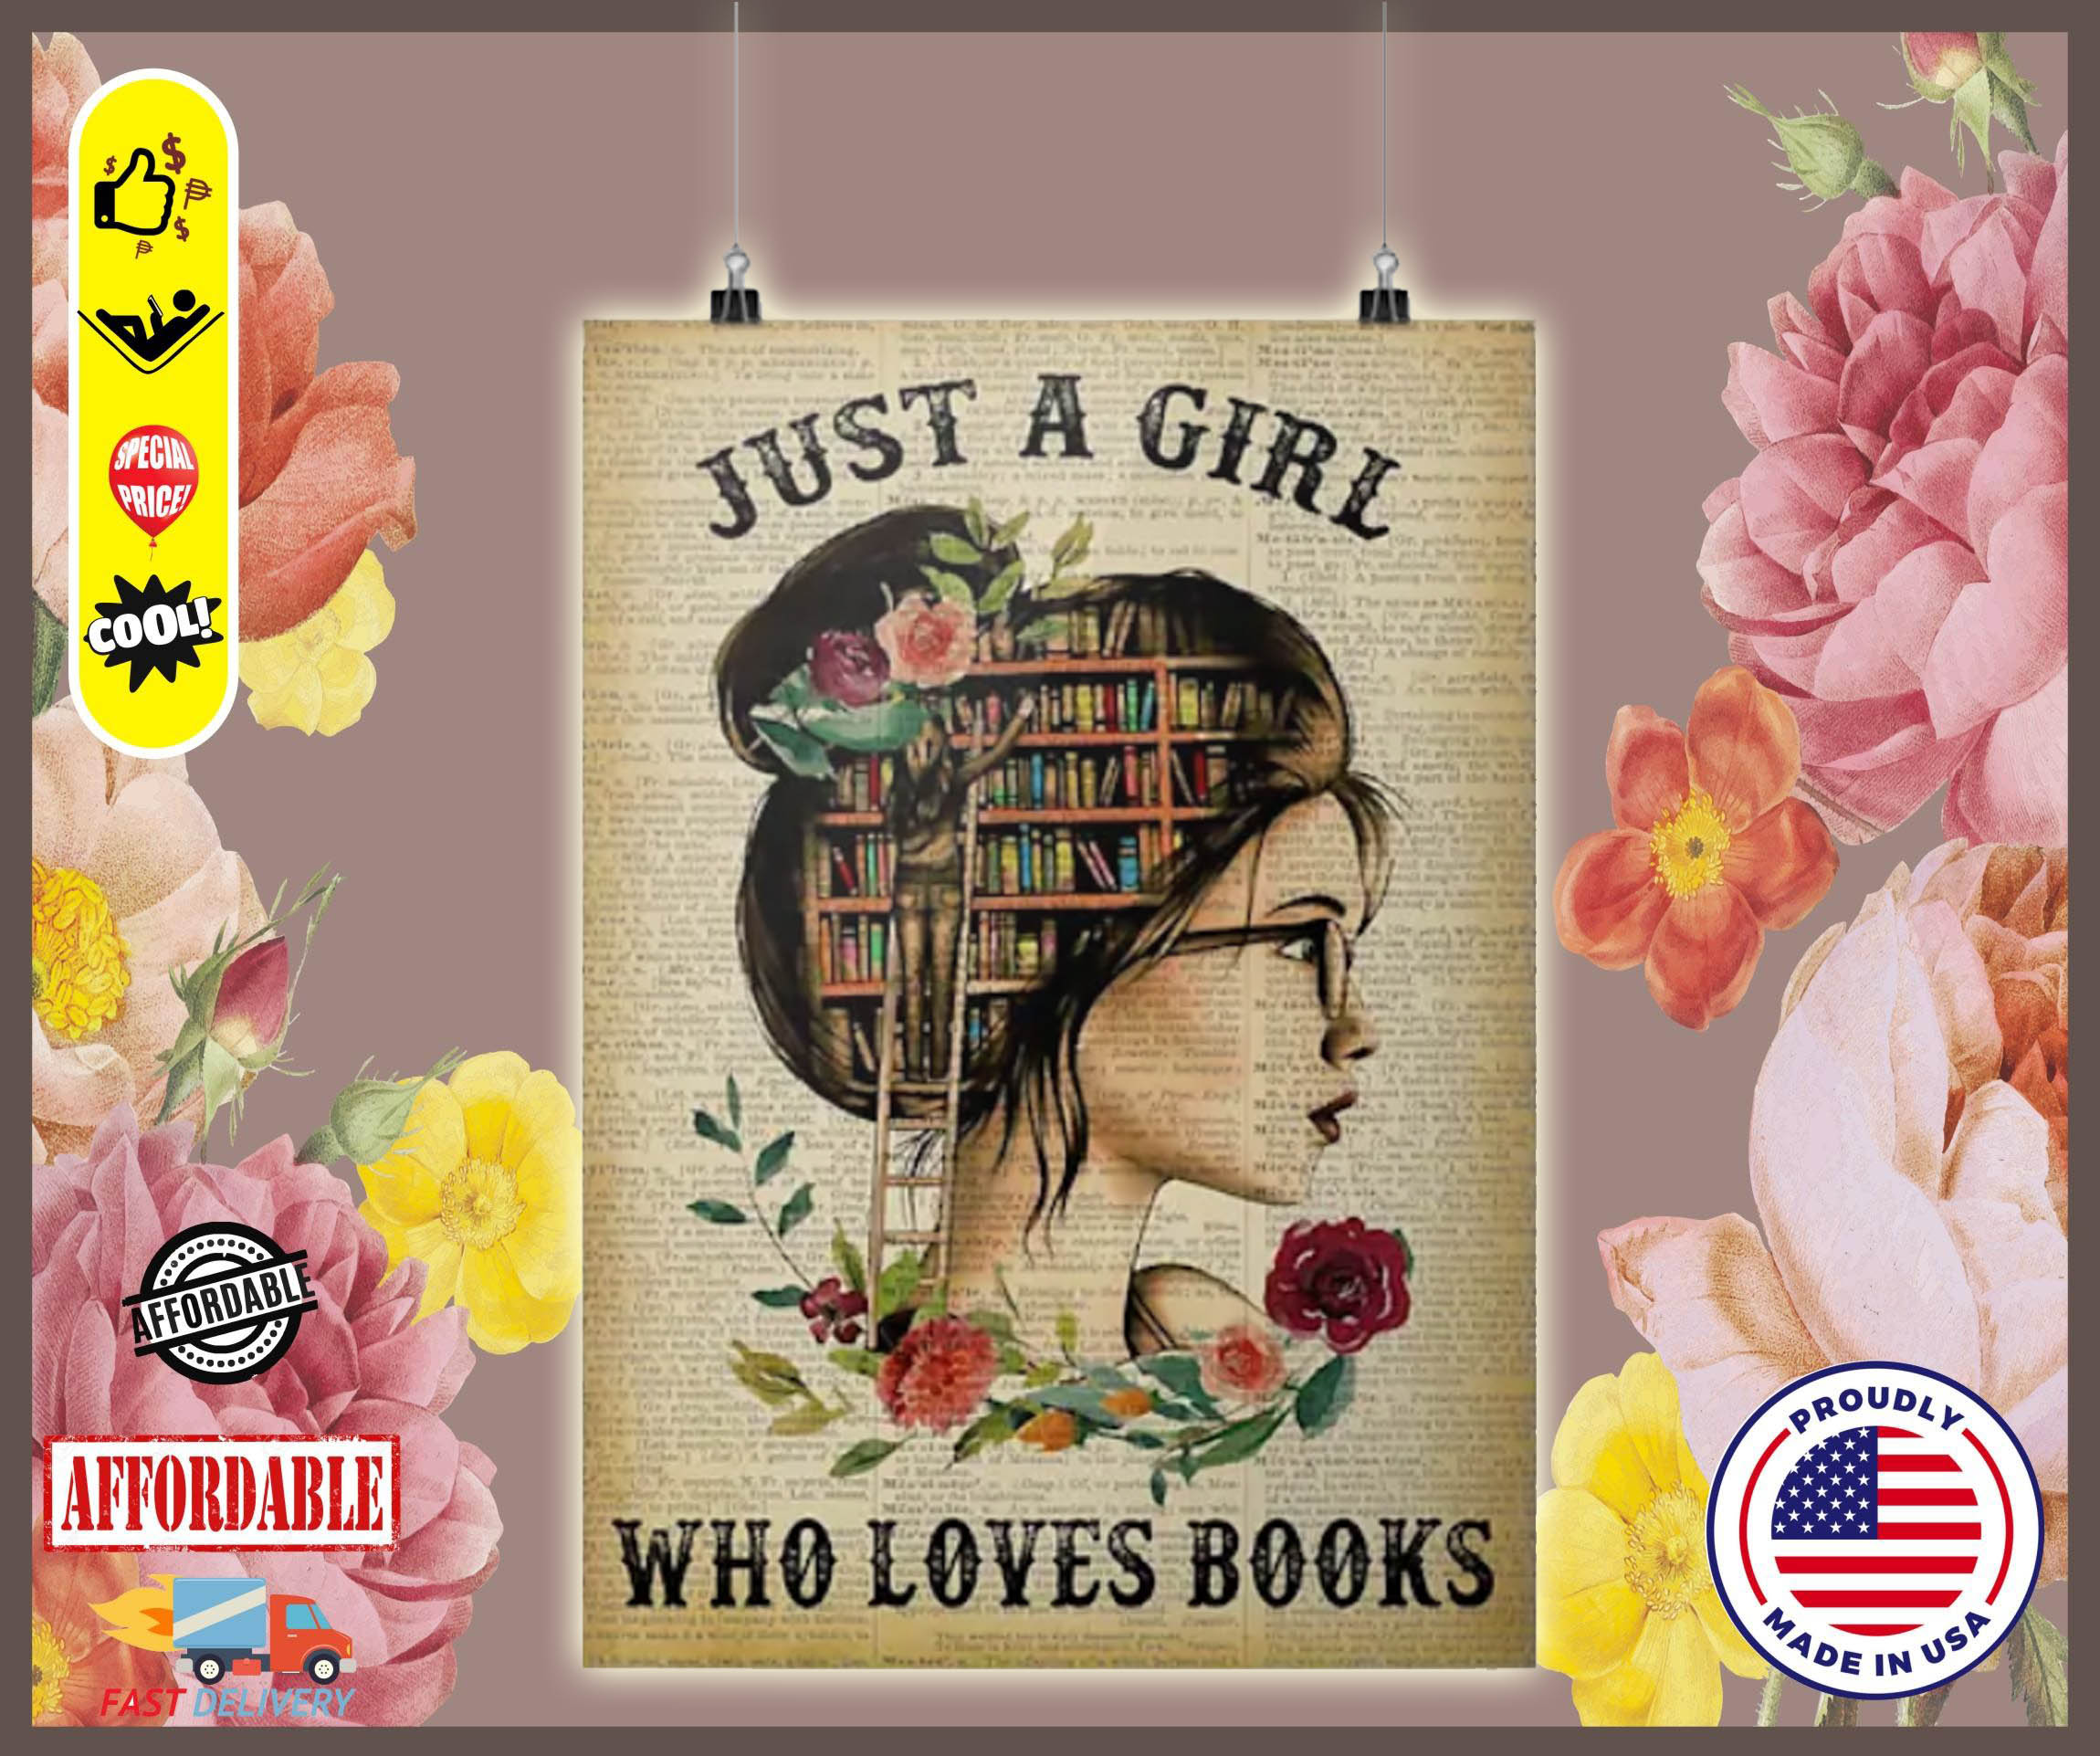 Just a girl who loves books posters